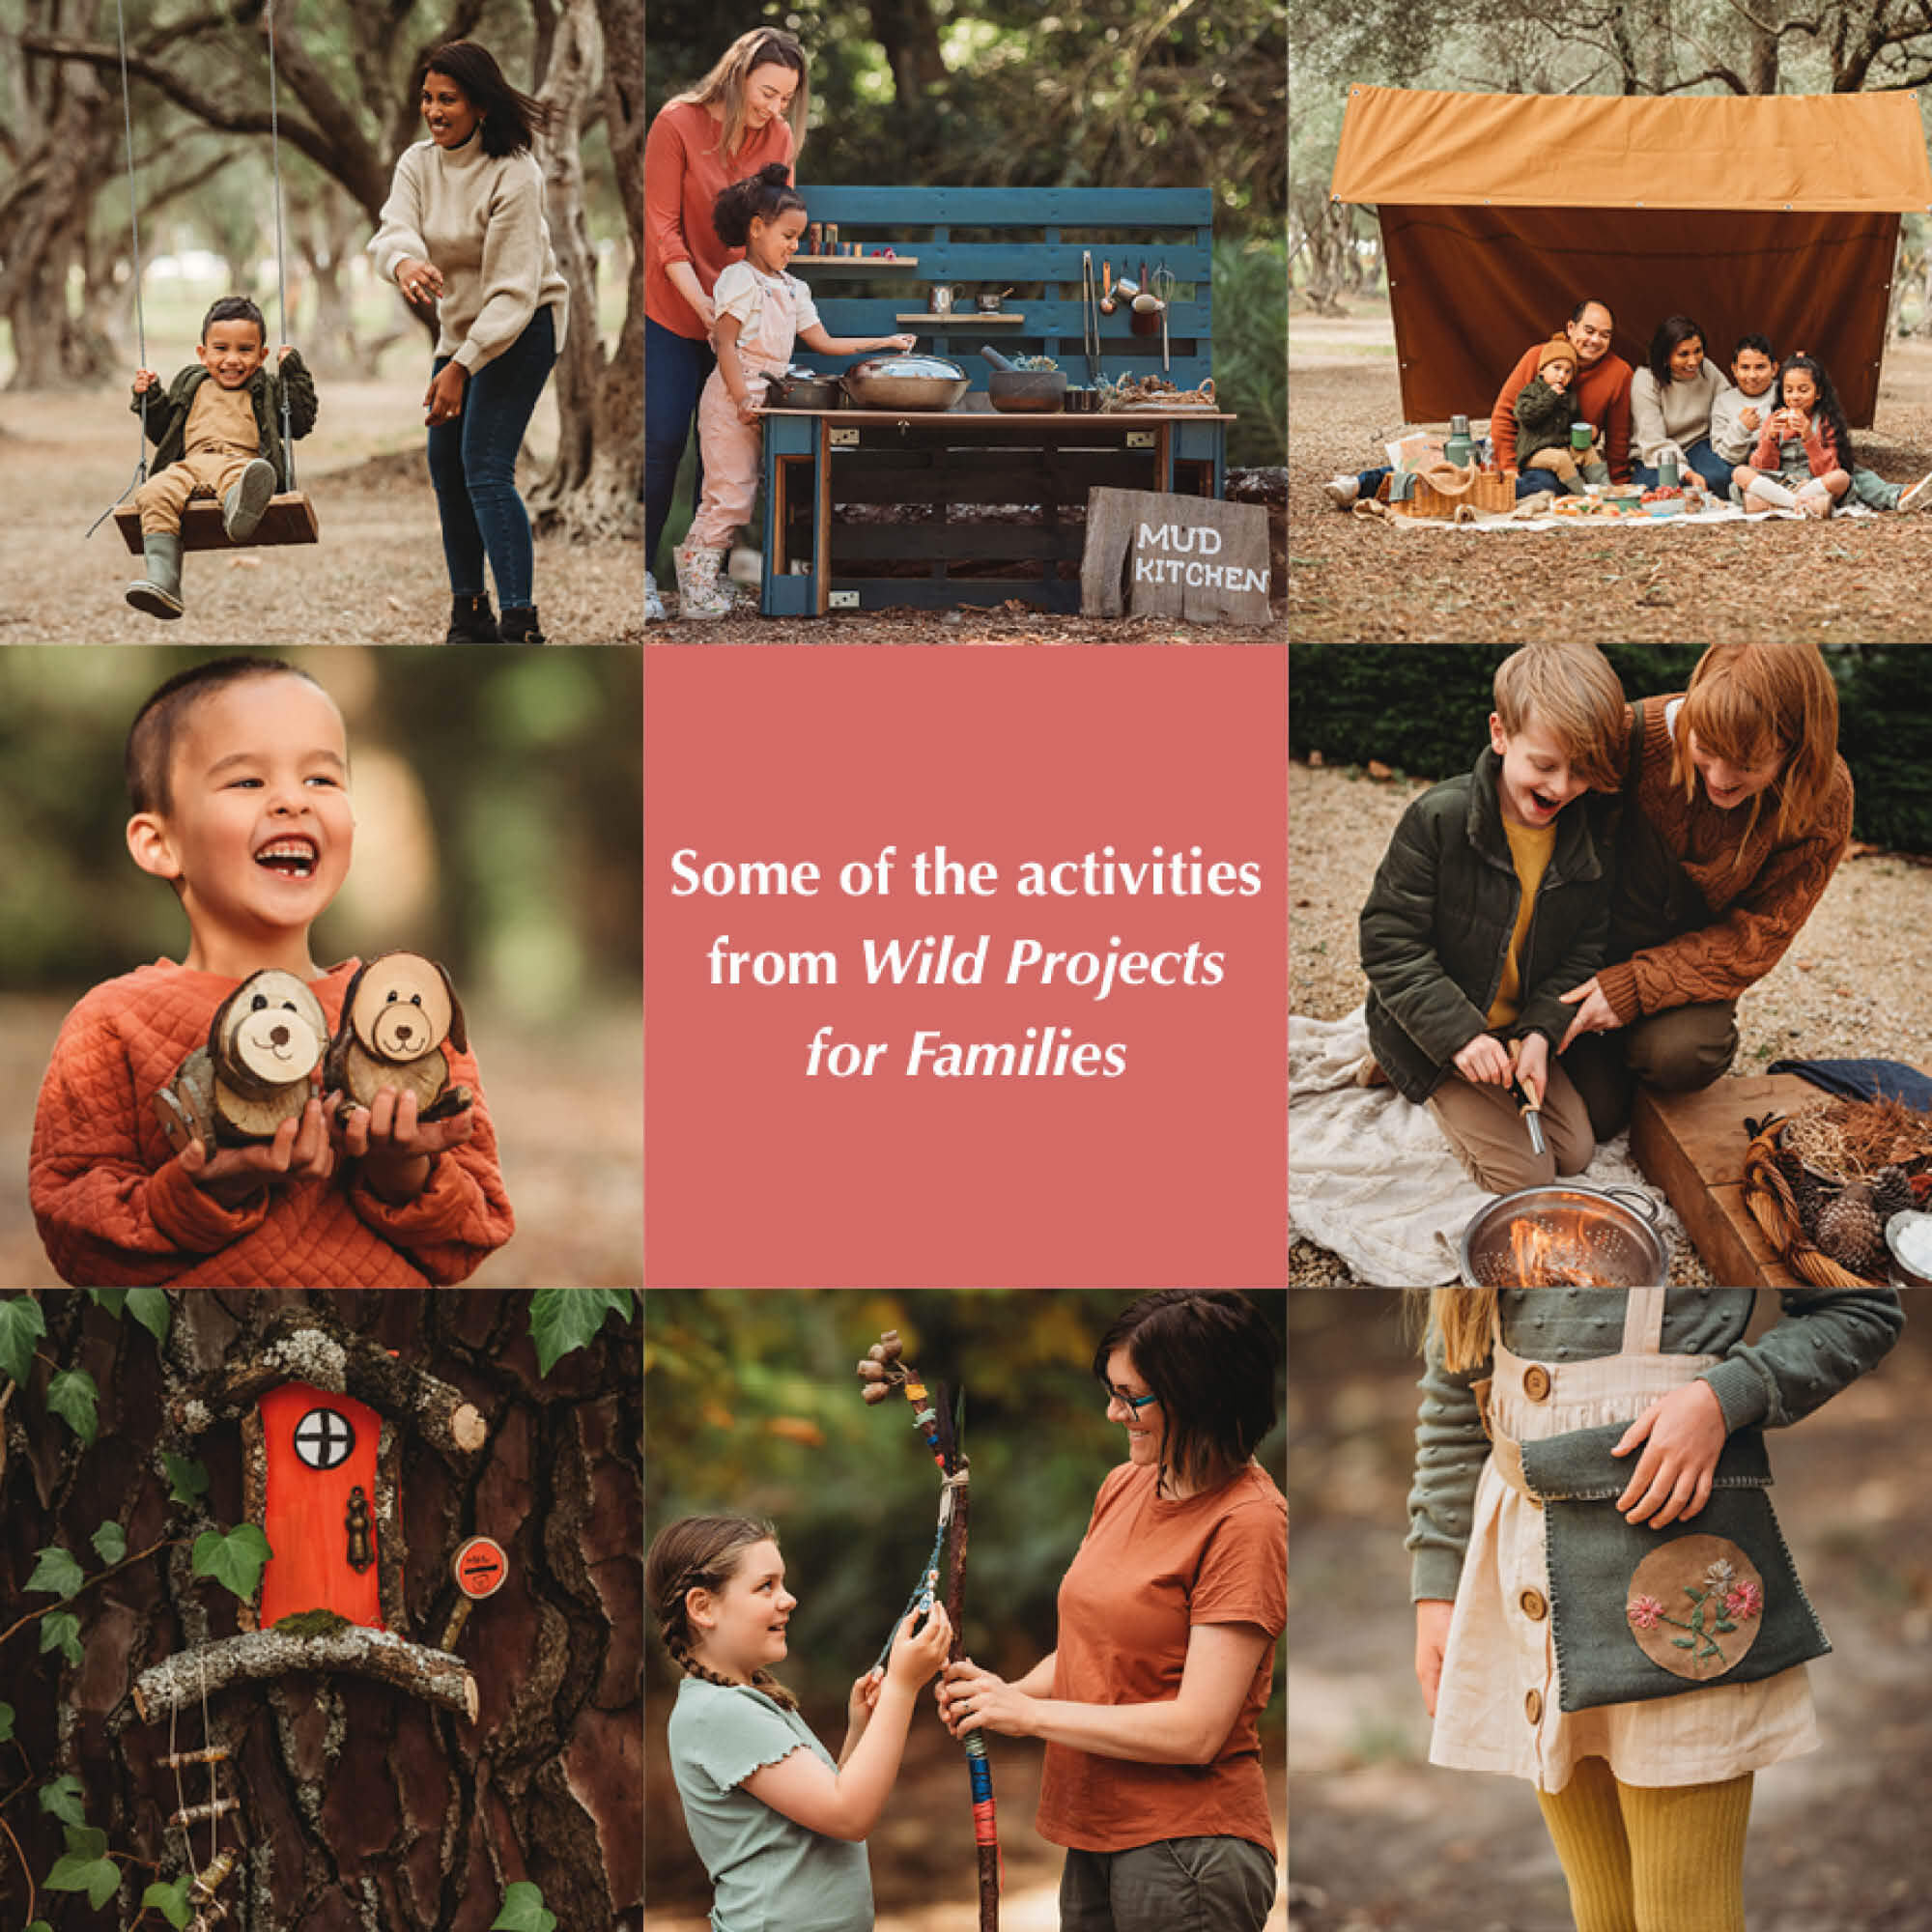 Selection of activities from the book Wild Projects for Families including DIY swing, mud kitchen, a frame shelter, log dogs, fire starting, fairy door, hiking stick and treasure bag.